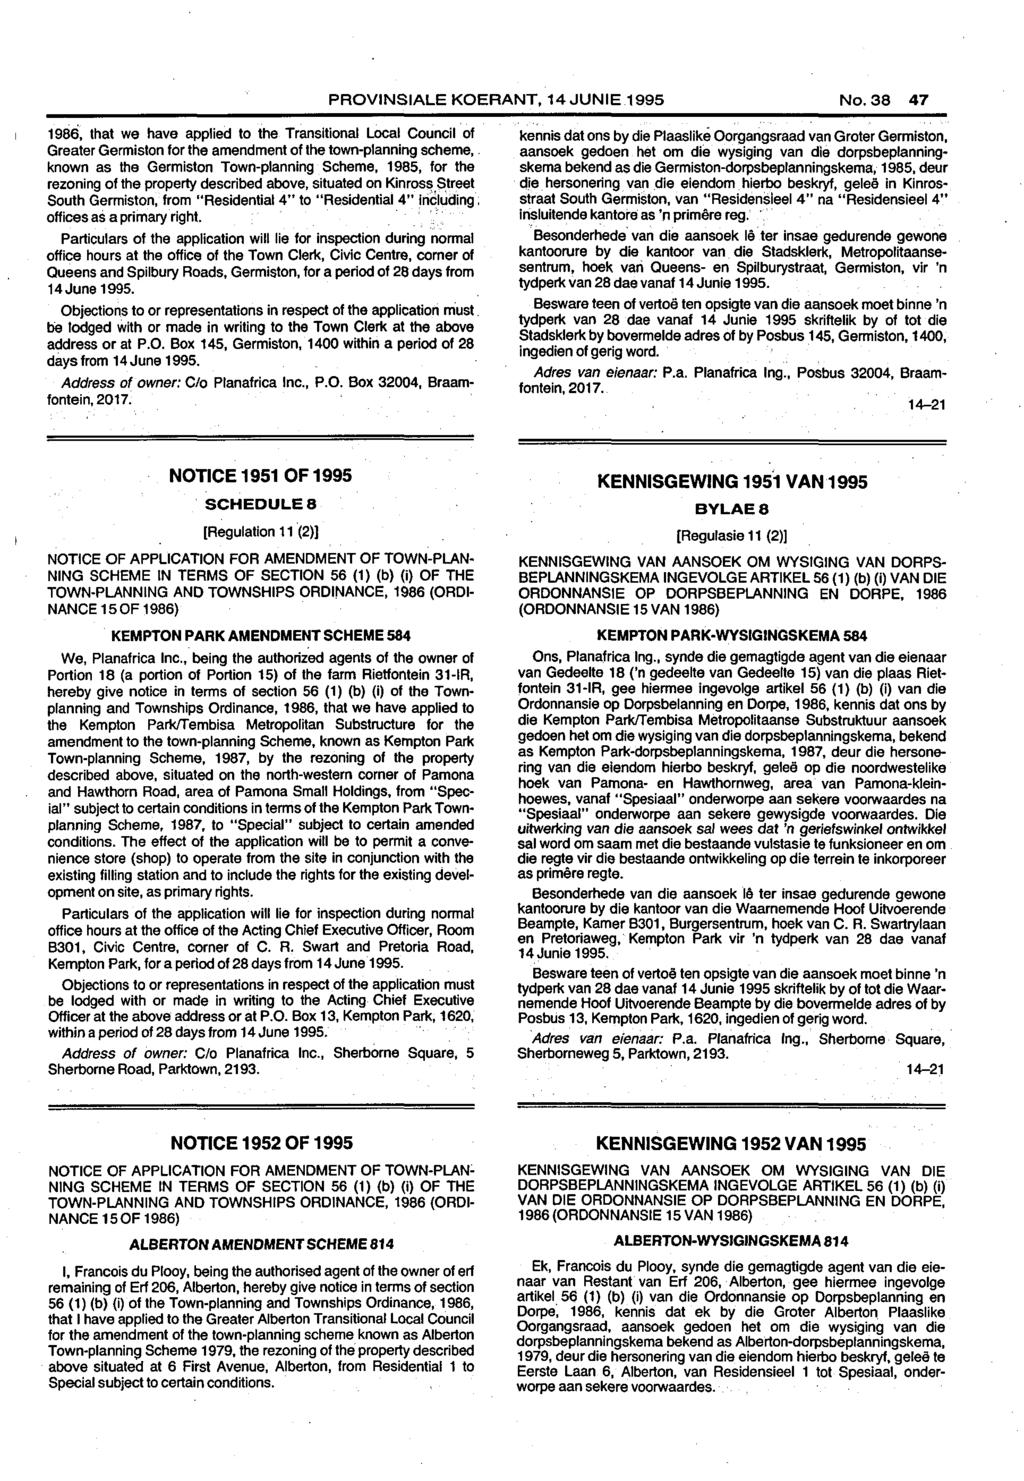 PROVINSIALE KOERANT,14JUNIE.1995 No. 47 1986, that we have applied to the Transitional Local Council of Greater Germiston for the amendment of the town-planning scheme,.